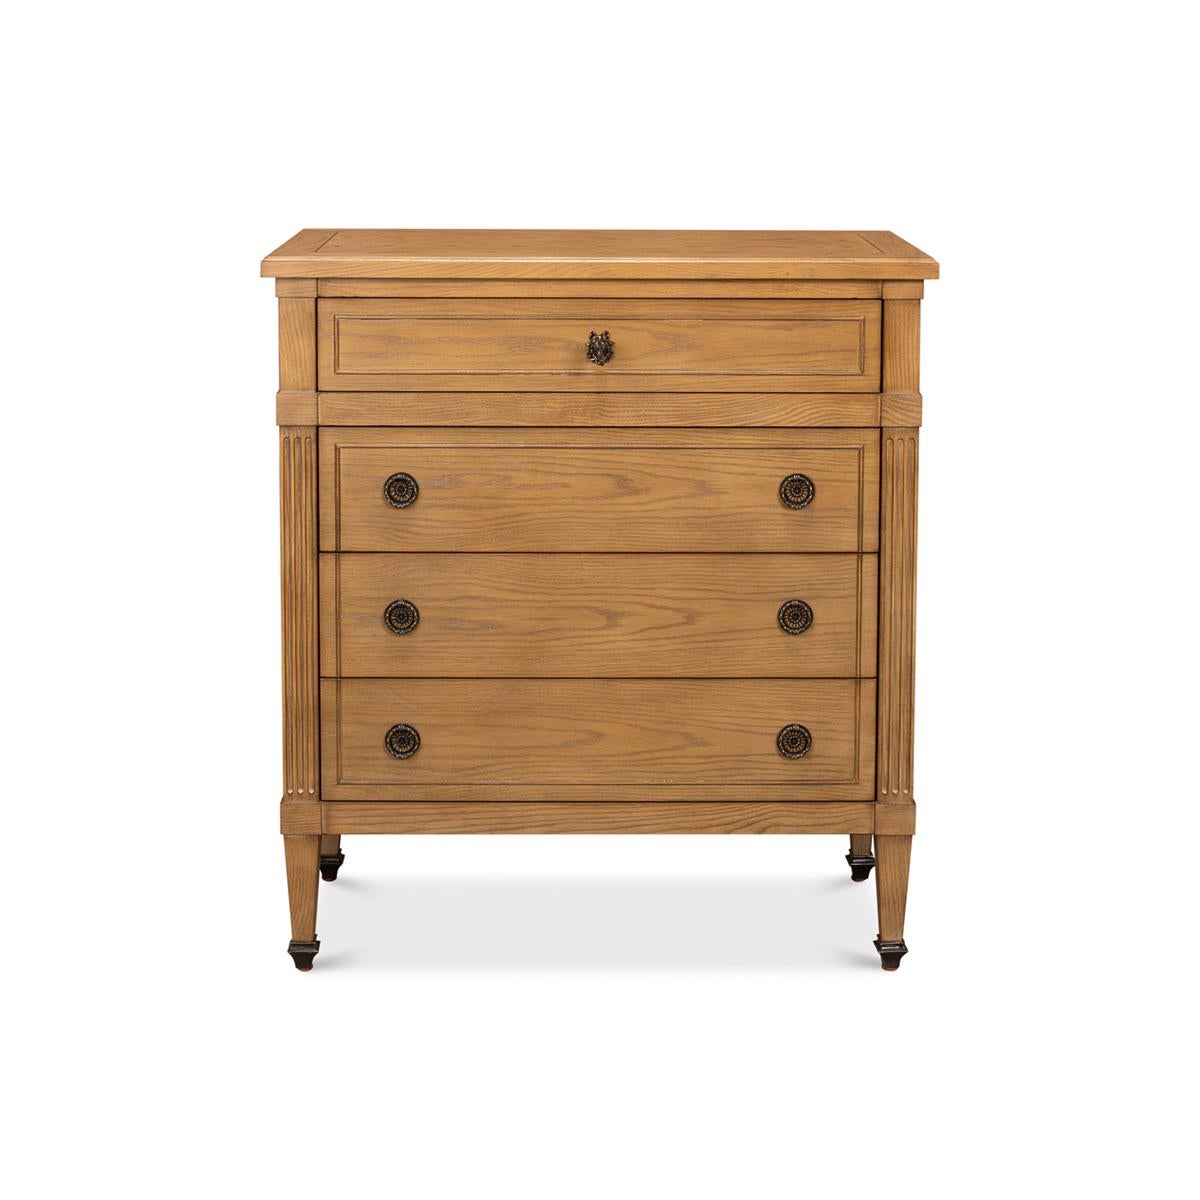 Mahogany in a light finish with oak-lined drawers. Four drawers with neo-classic hardware, fluted styles raised on square tapered legs.

Dimensions: 32